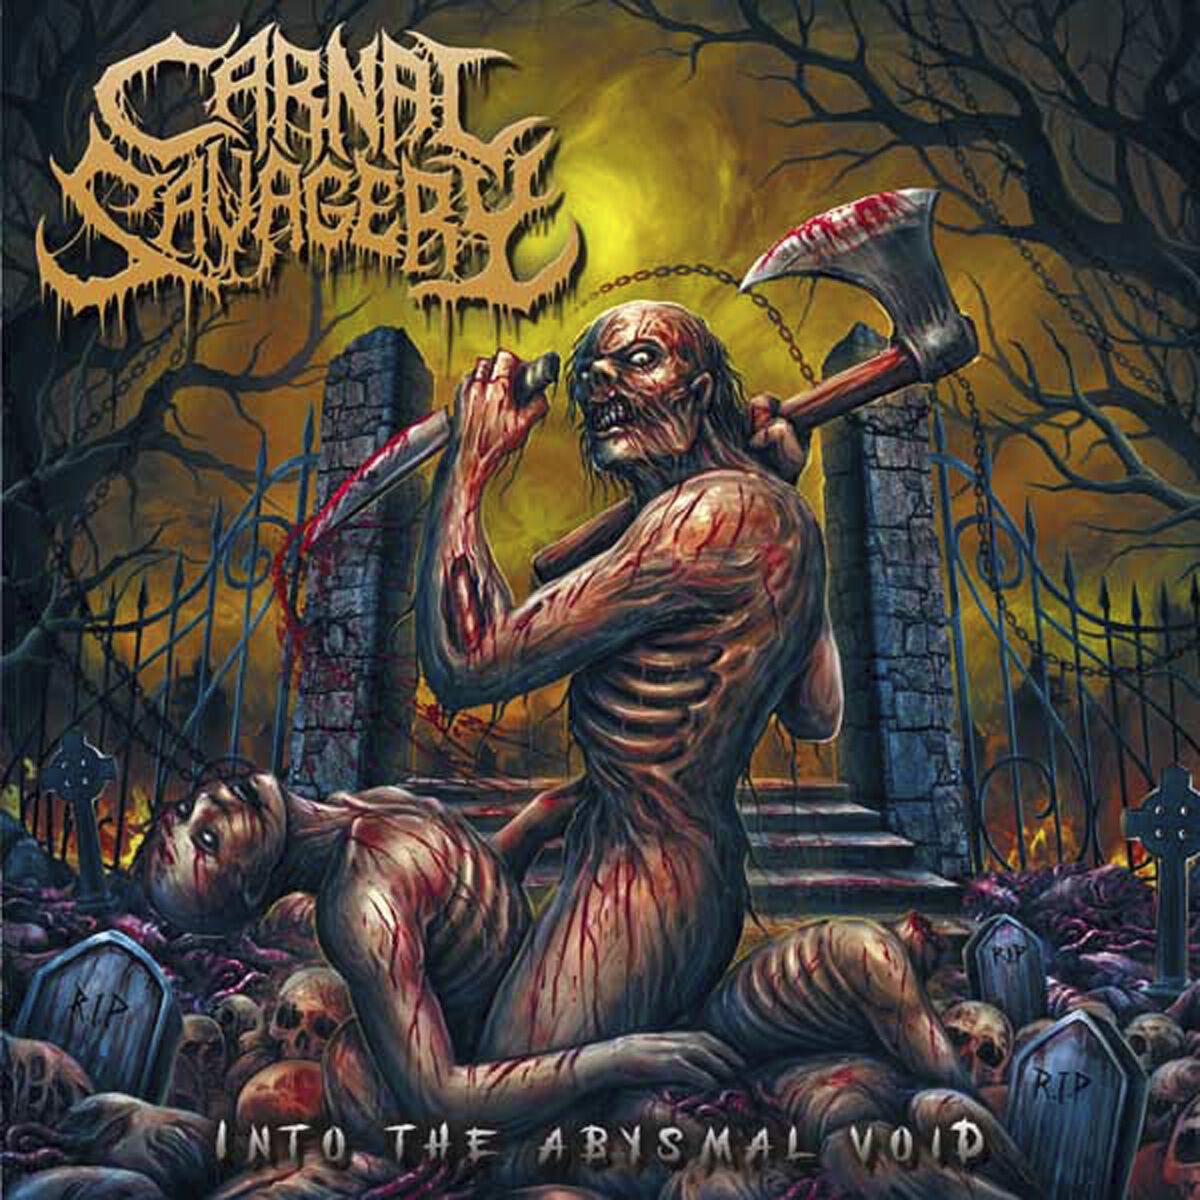 Carnal Savagery Into The Abysmal Void CD multicolor